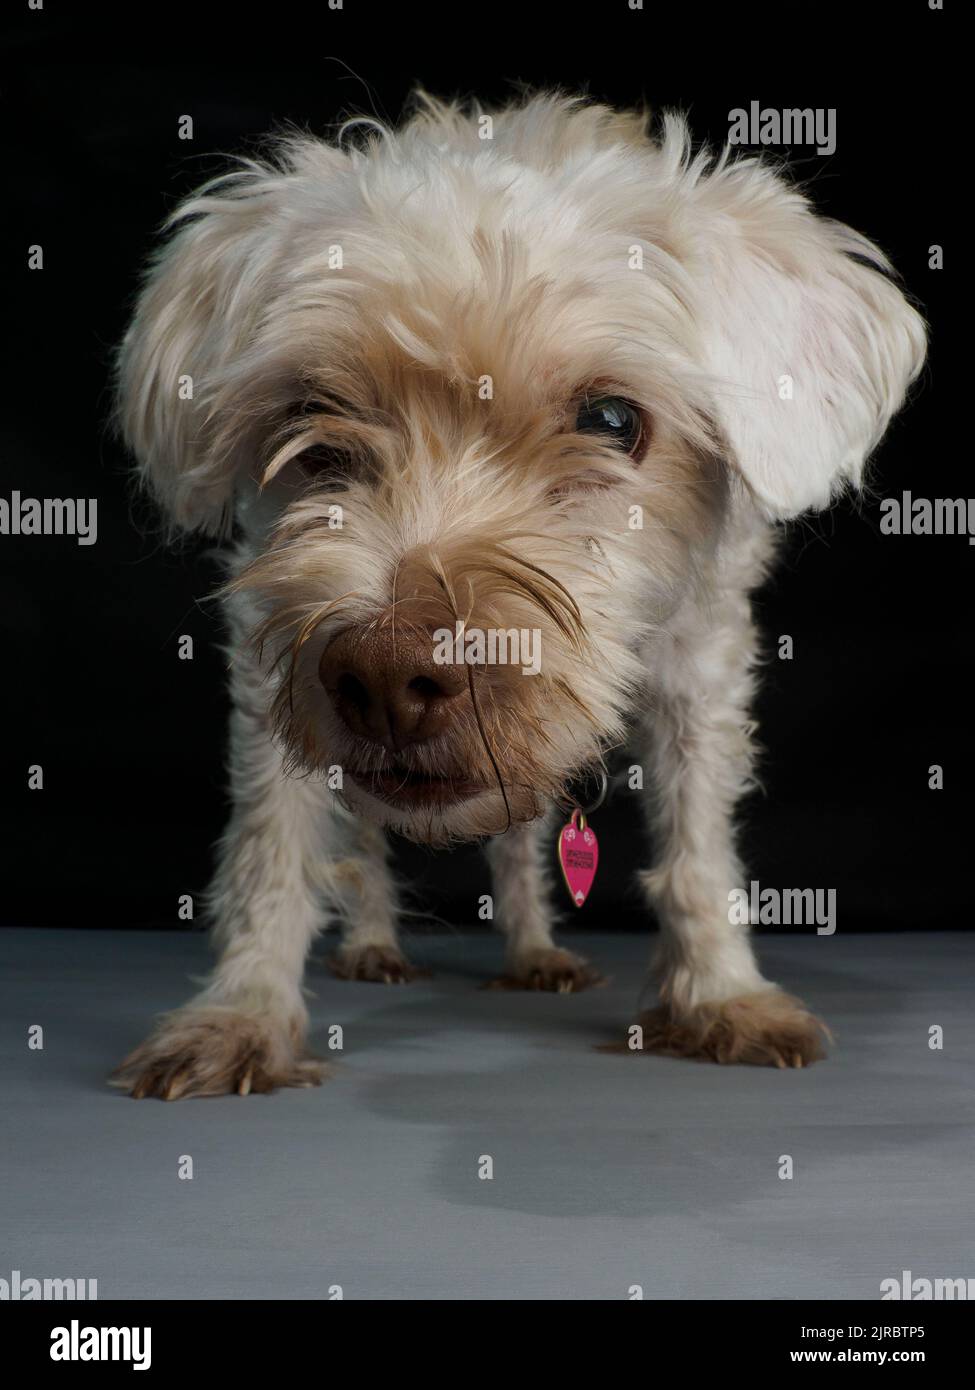 Studio portrait of an old blind white dog. Stock Photo